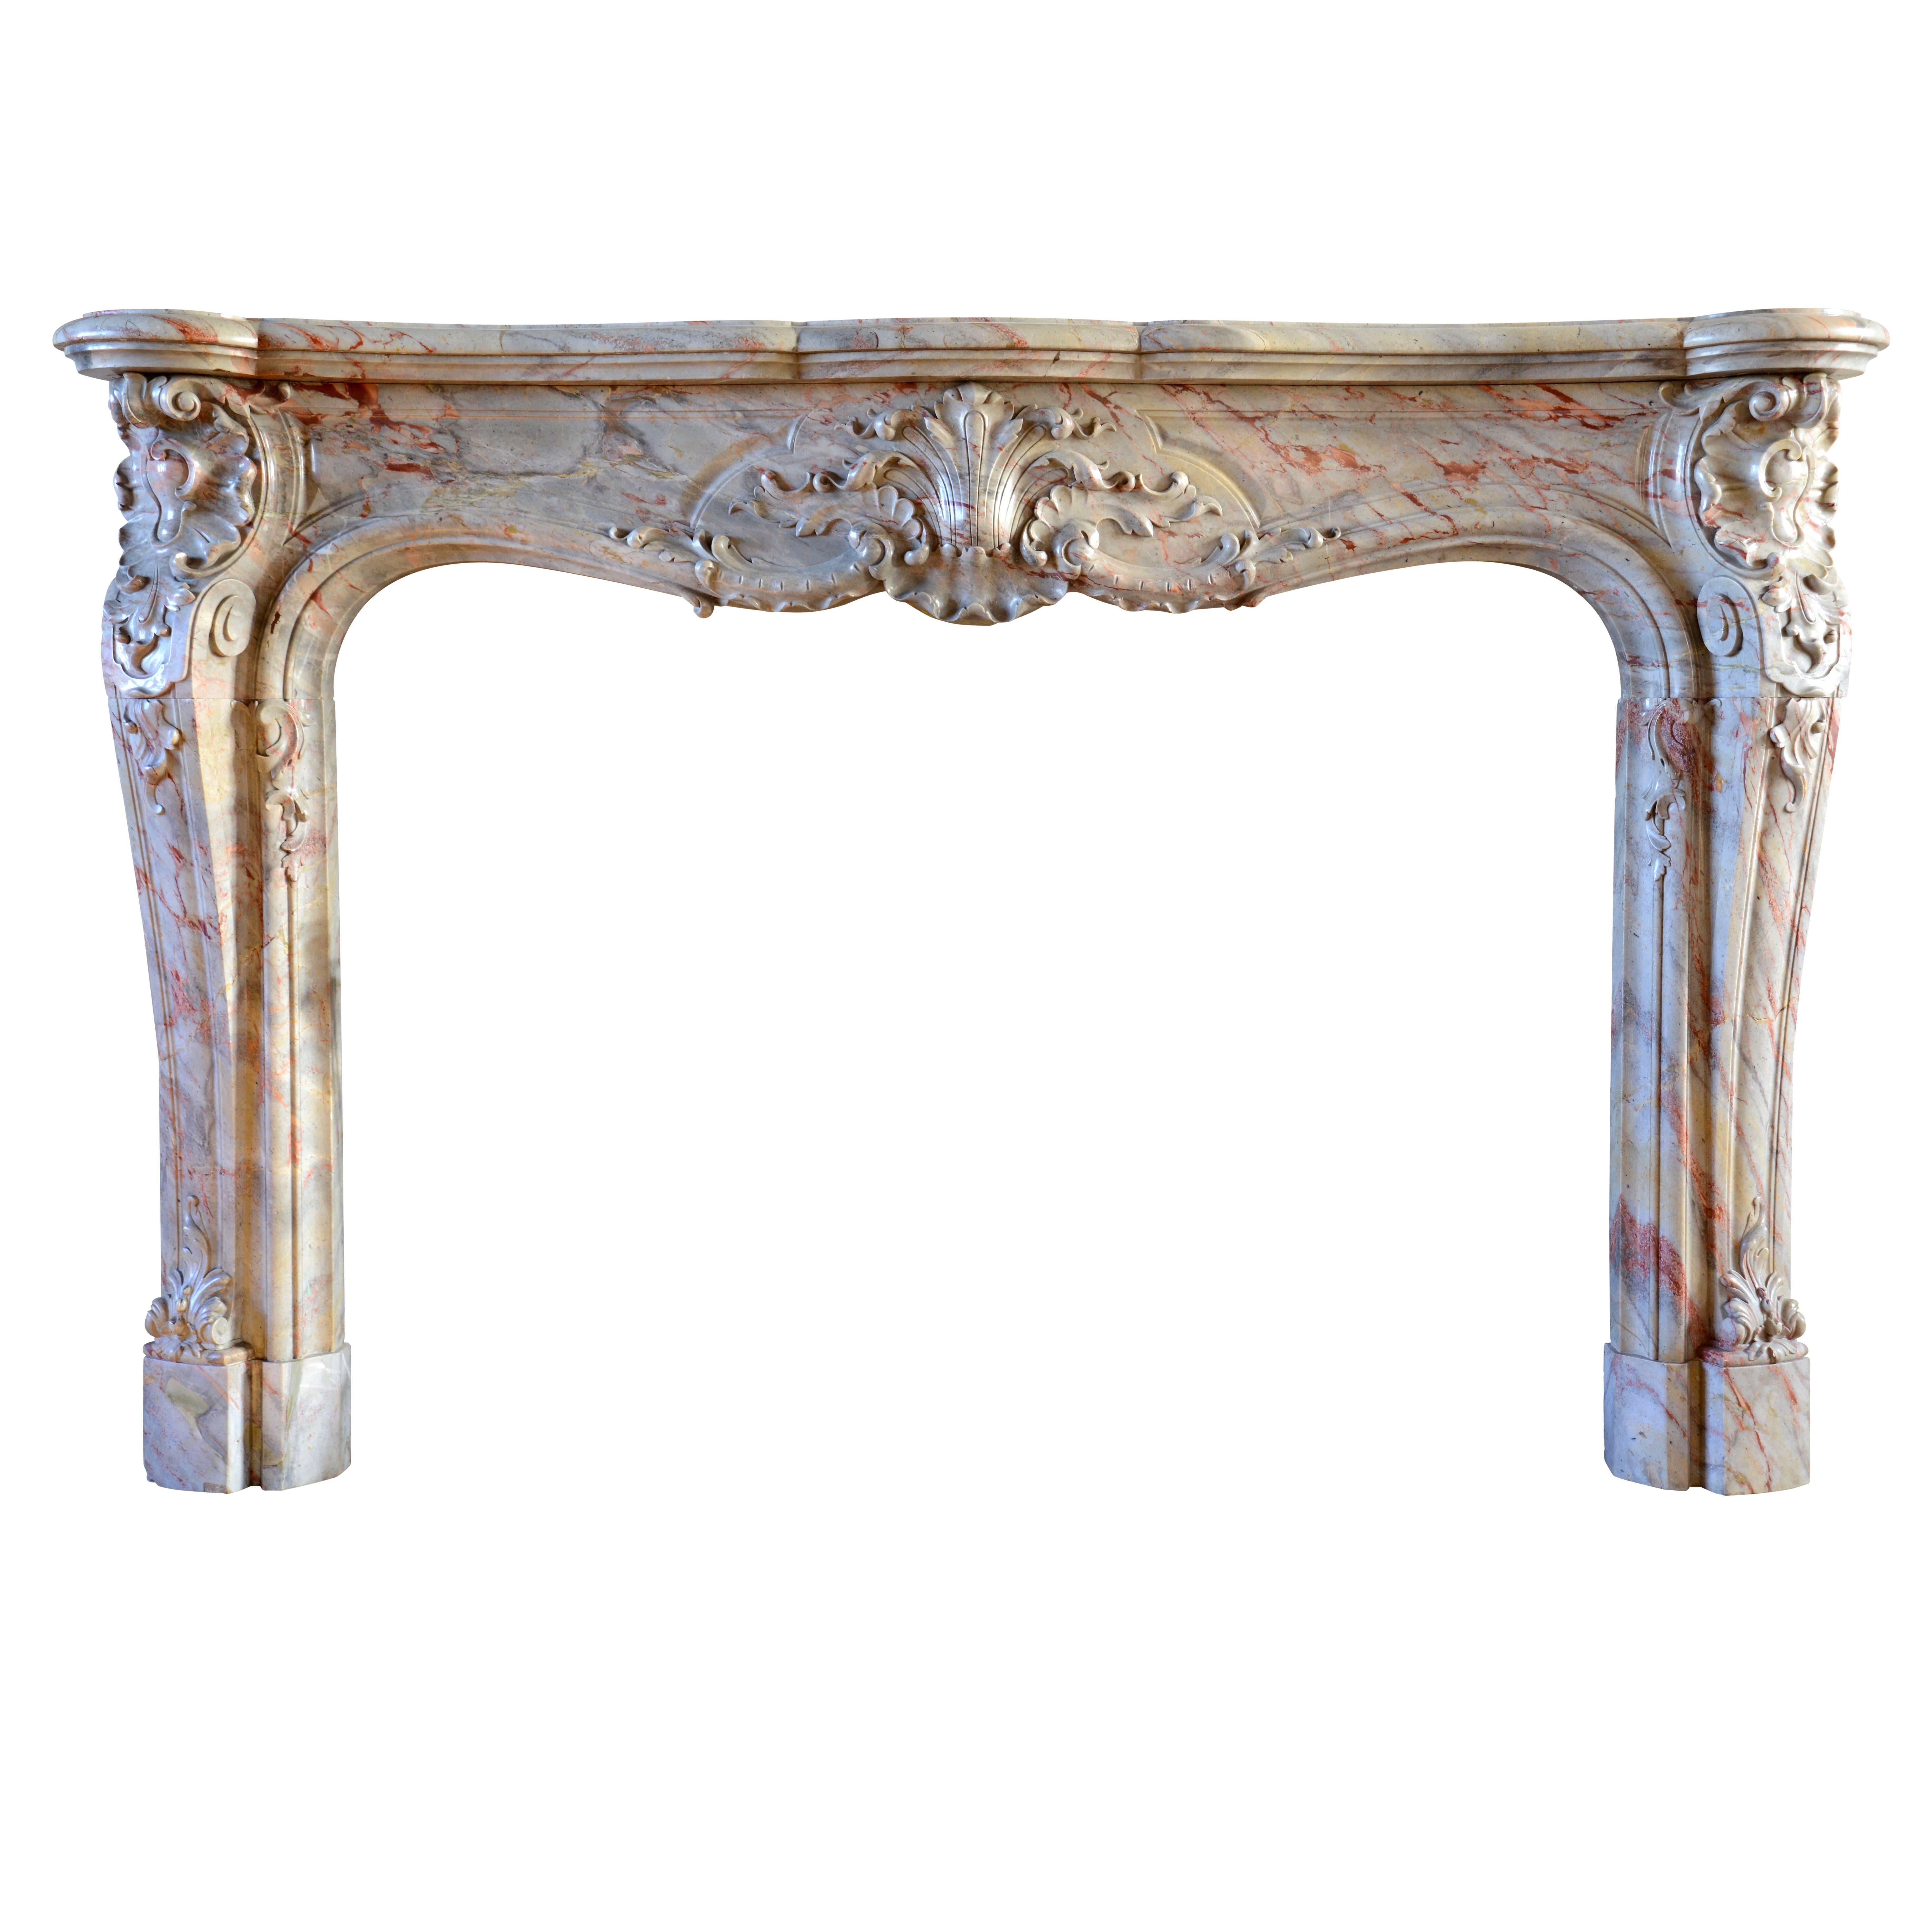 Sarrancolin Marble Louis 15 Fireplace, 19th Century For Sale